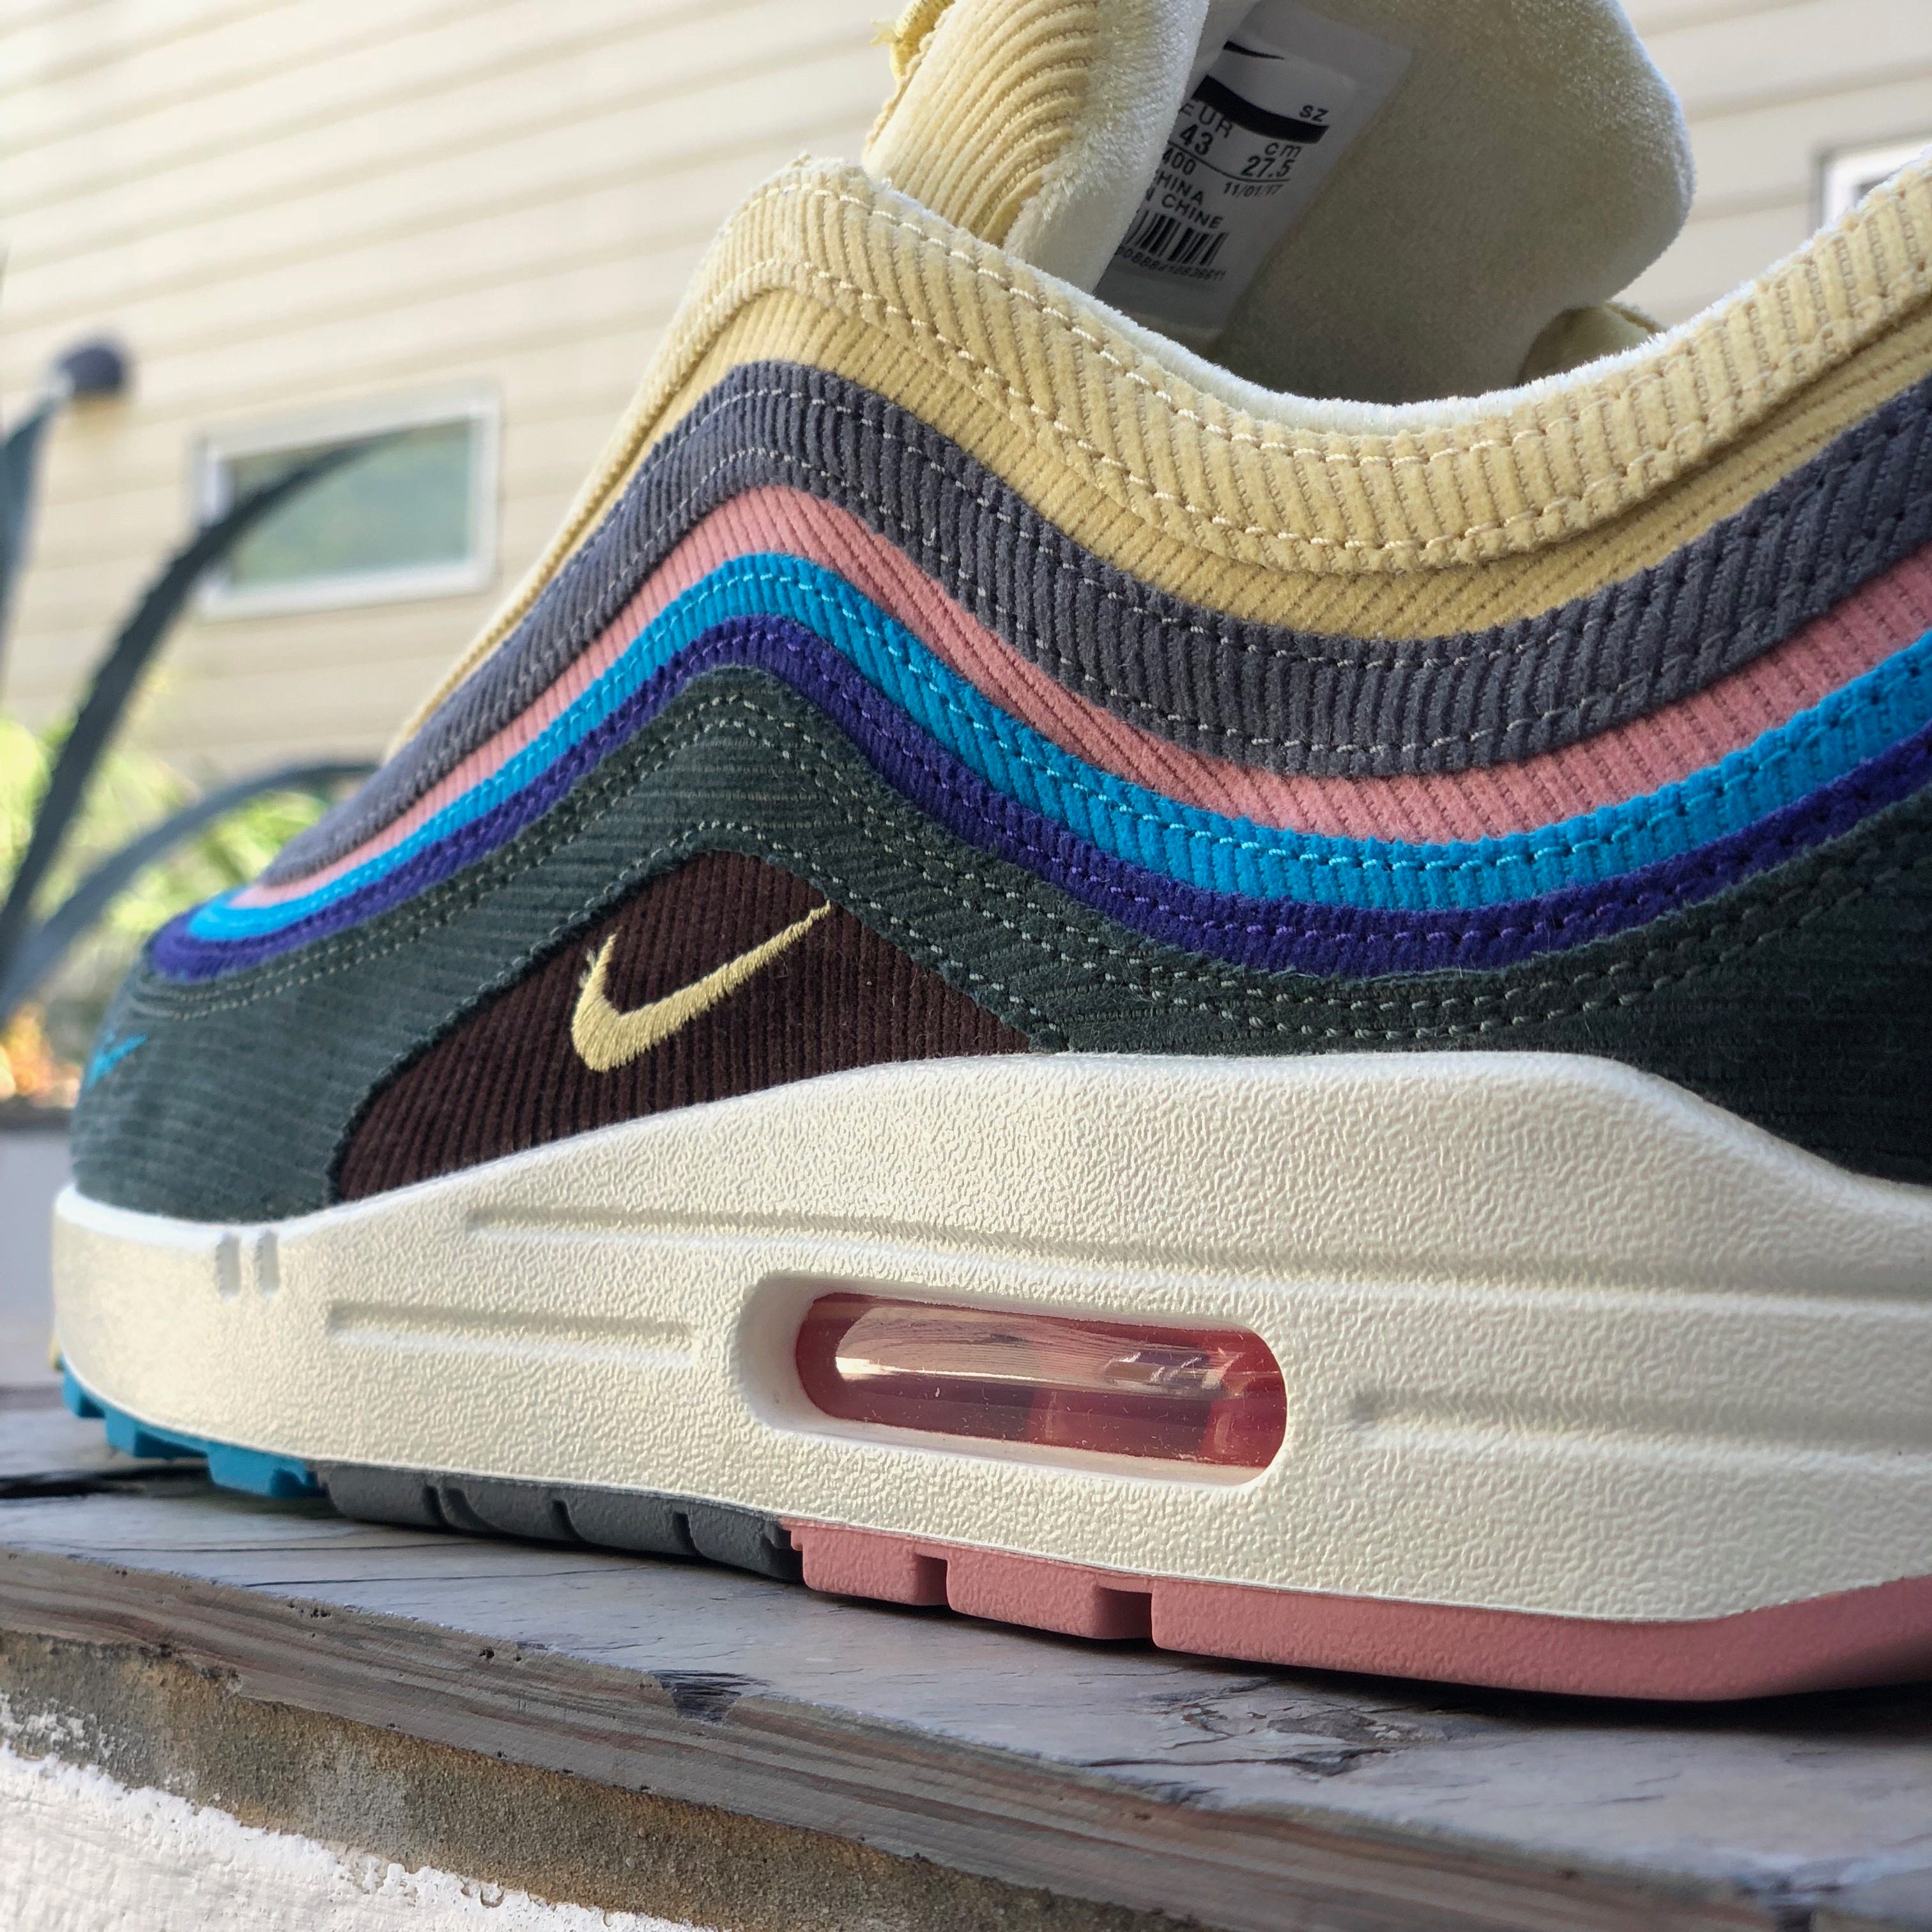 sean wotherspoon air max 1